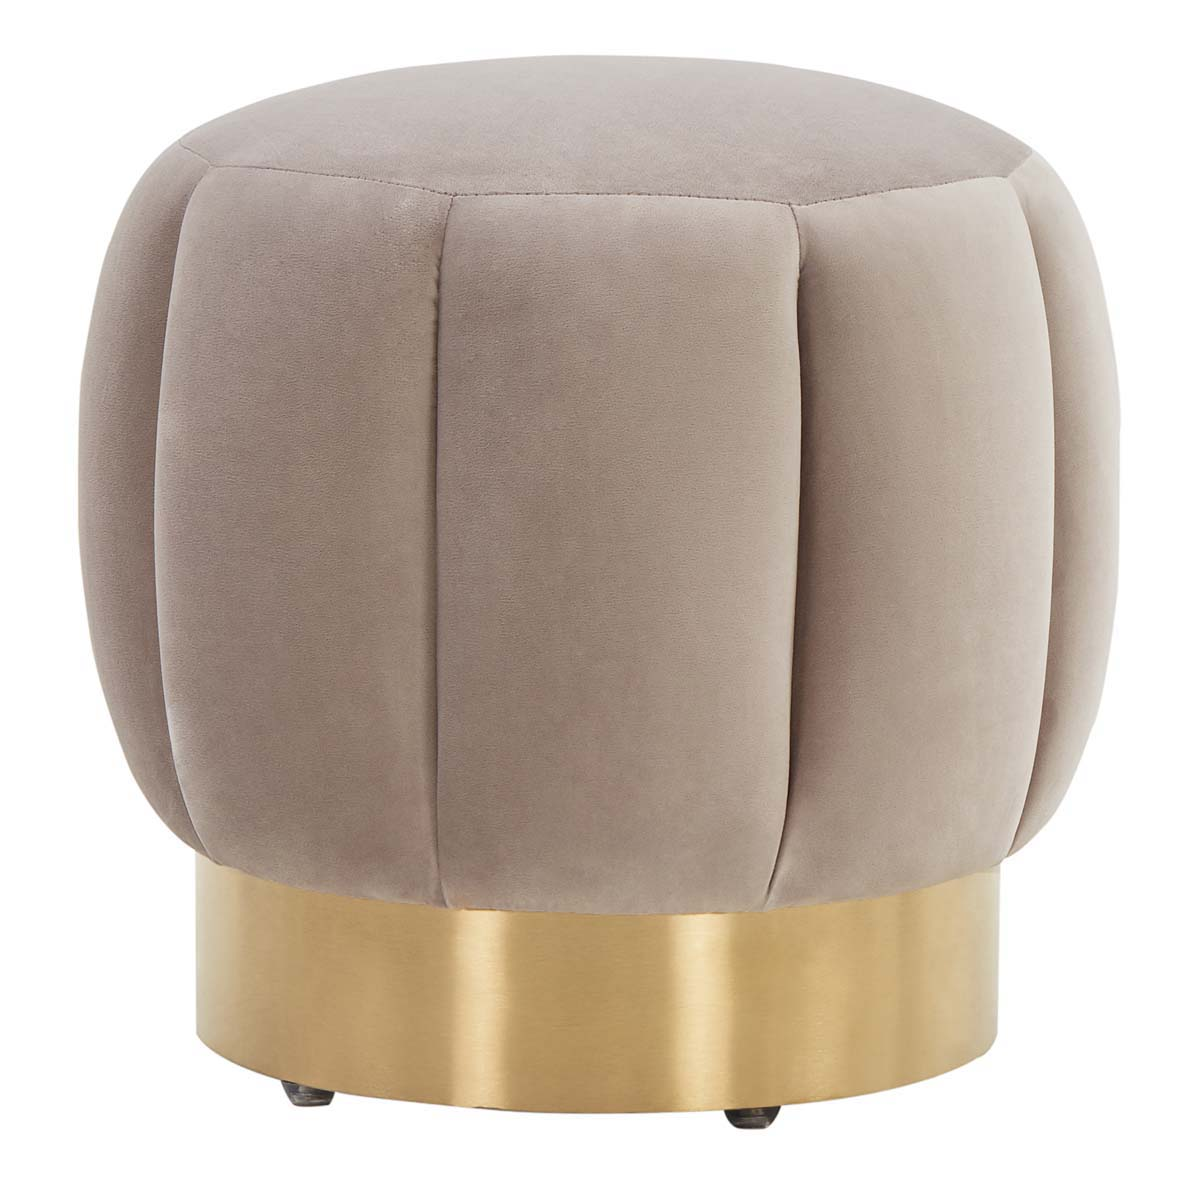 Safavieh Couture Maxine Channel Tufted Otttoman - Pale Taupe